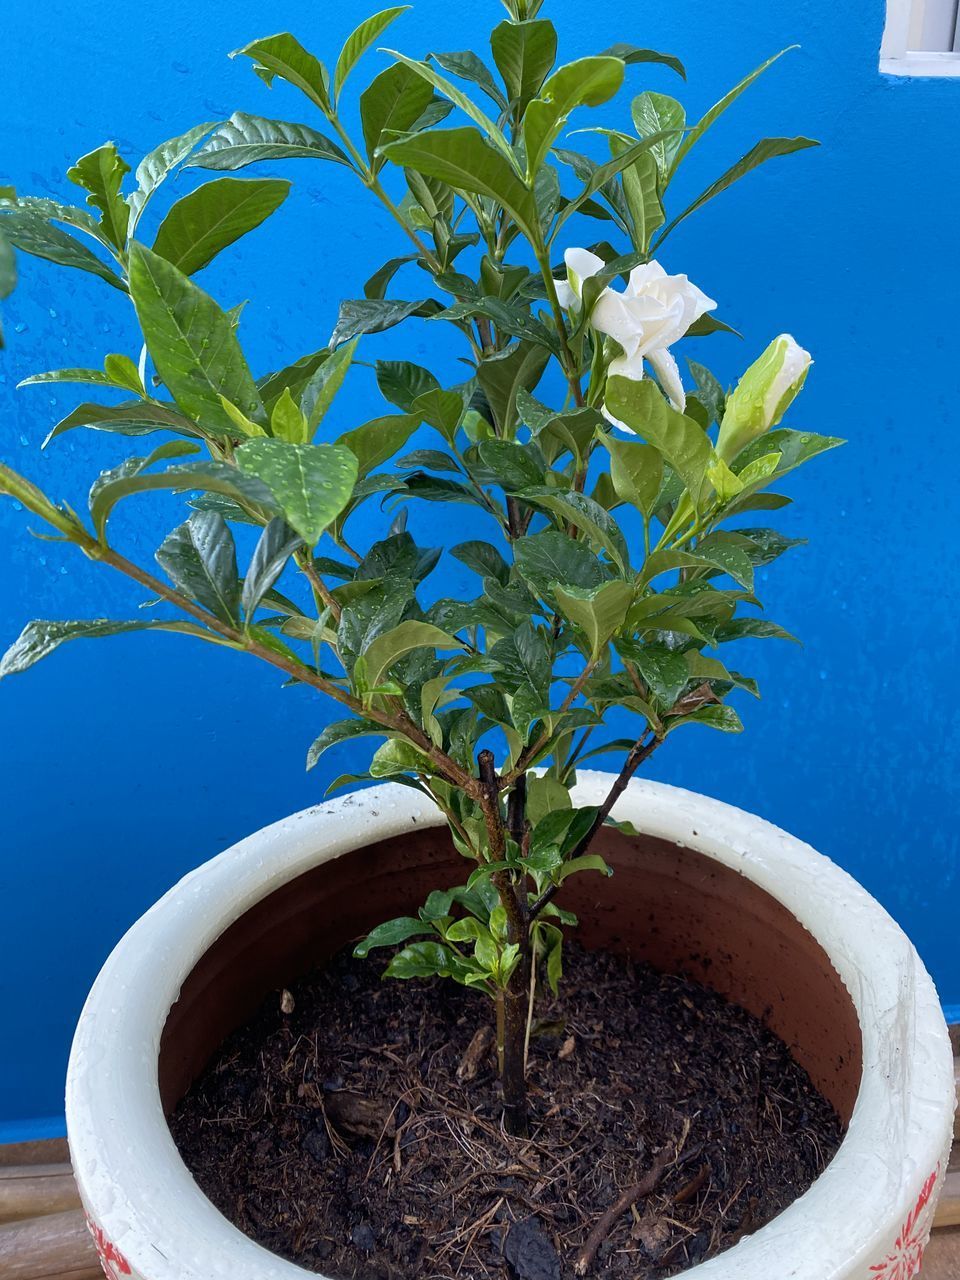 CLOSE-UP OF POTTED PLANT AGAINST BLUE WALL